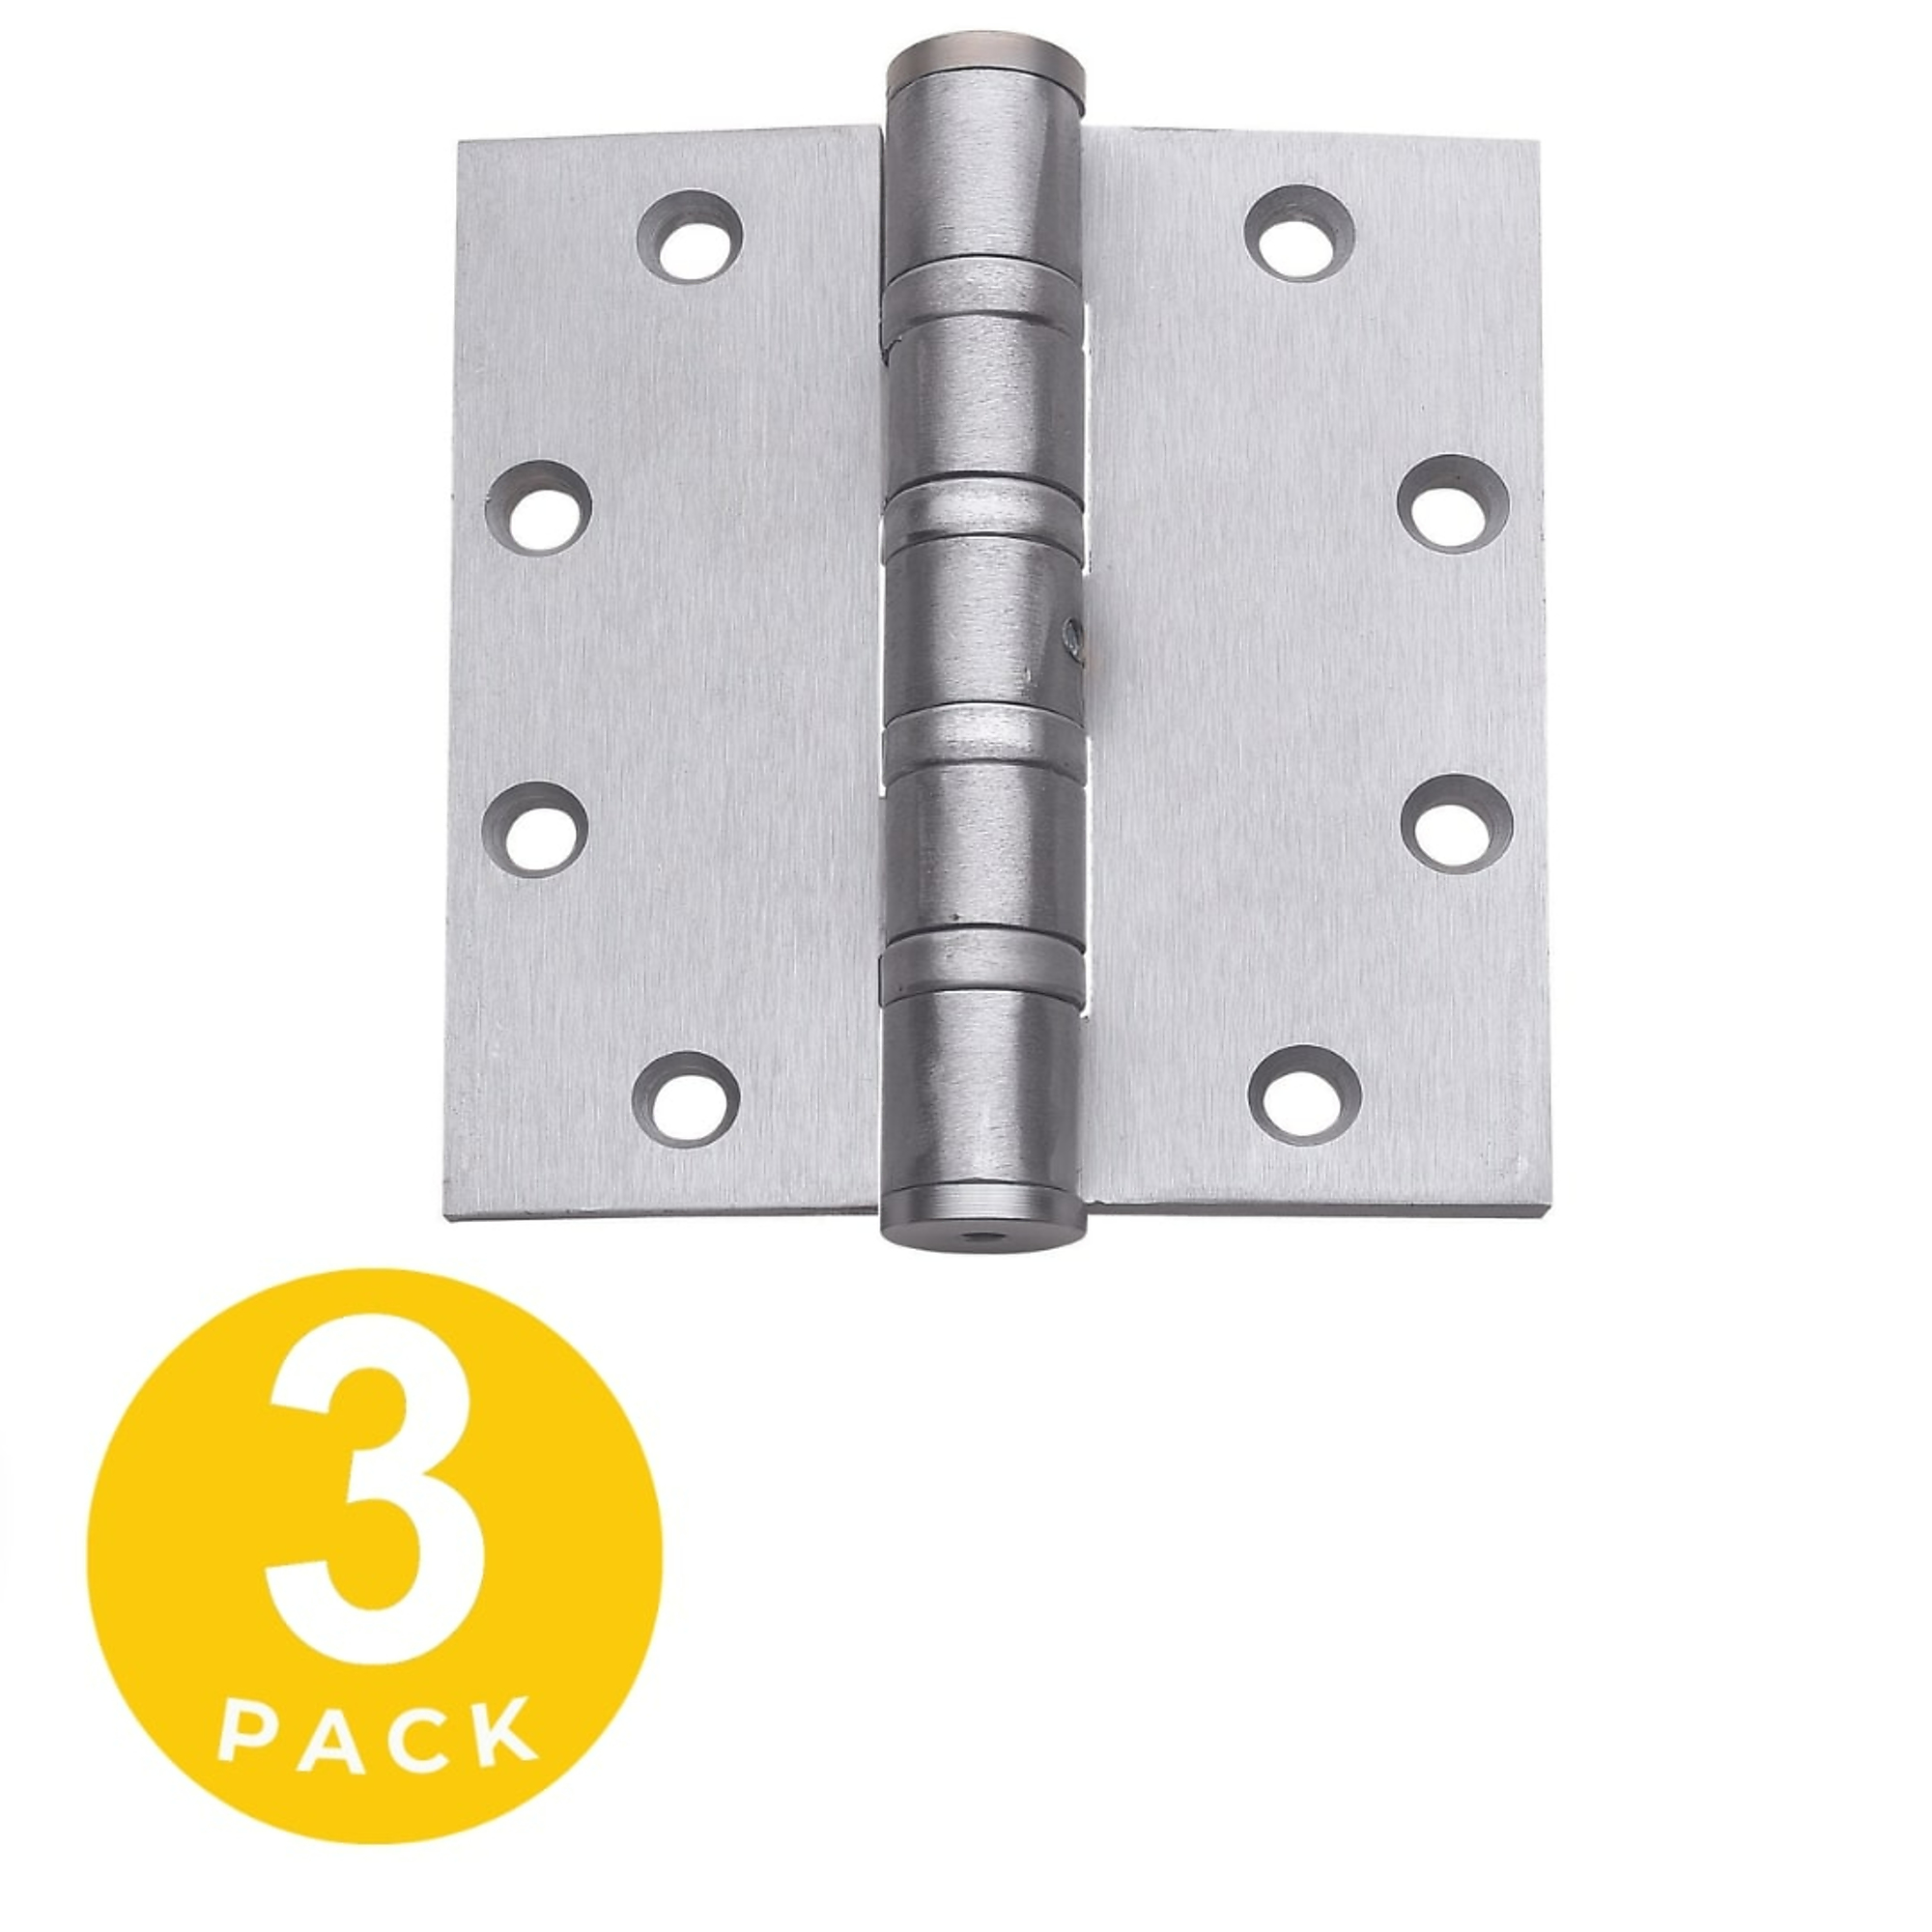 Global Door Controls Commercial Hinge, 3-Pack, Dull Chrome, 5Inch x 4.5Inch, Model CPH5045BBNRP26D-3